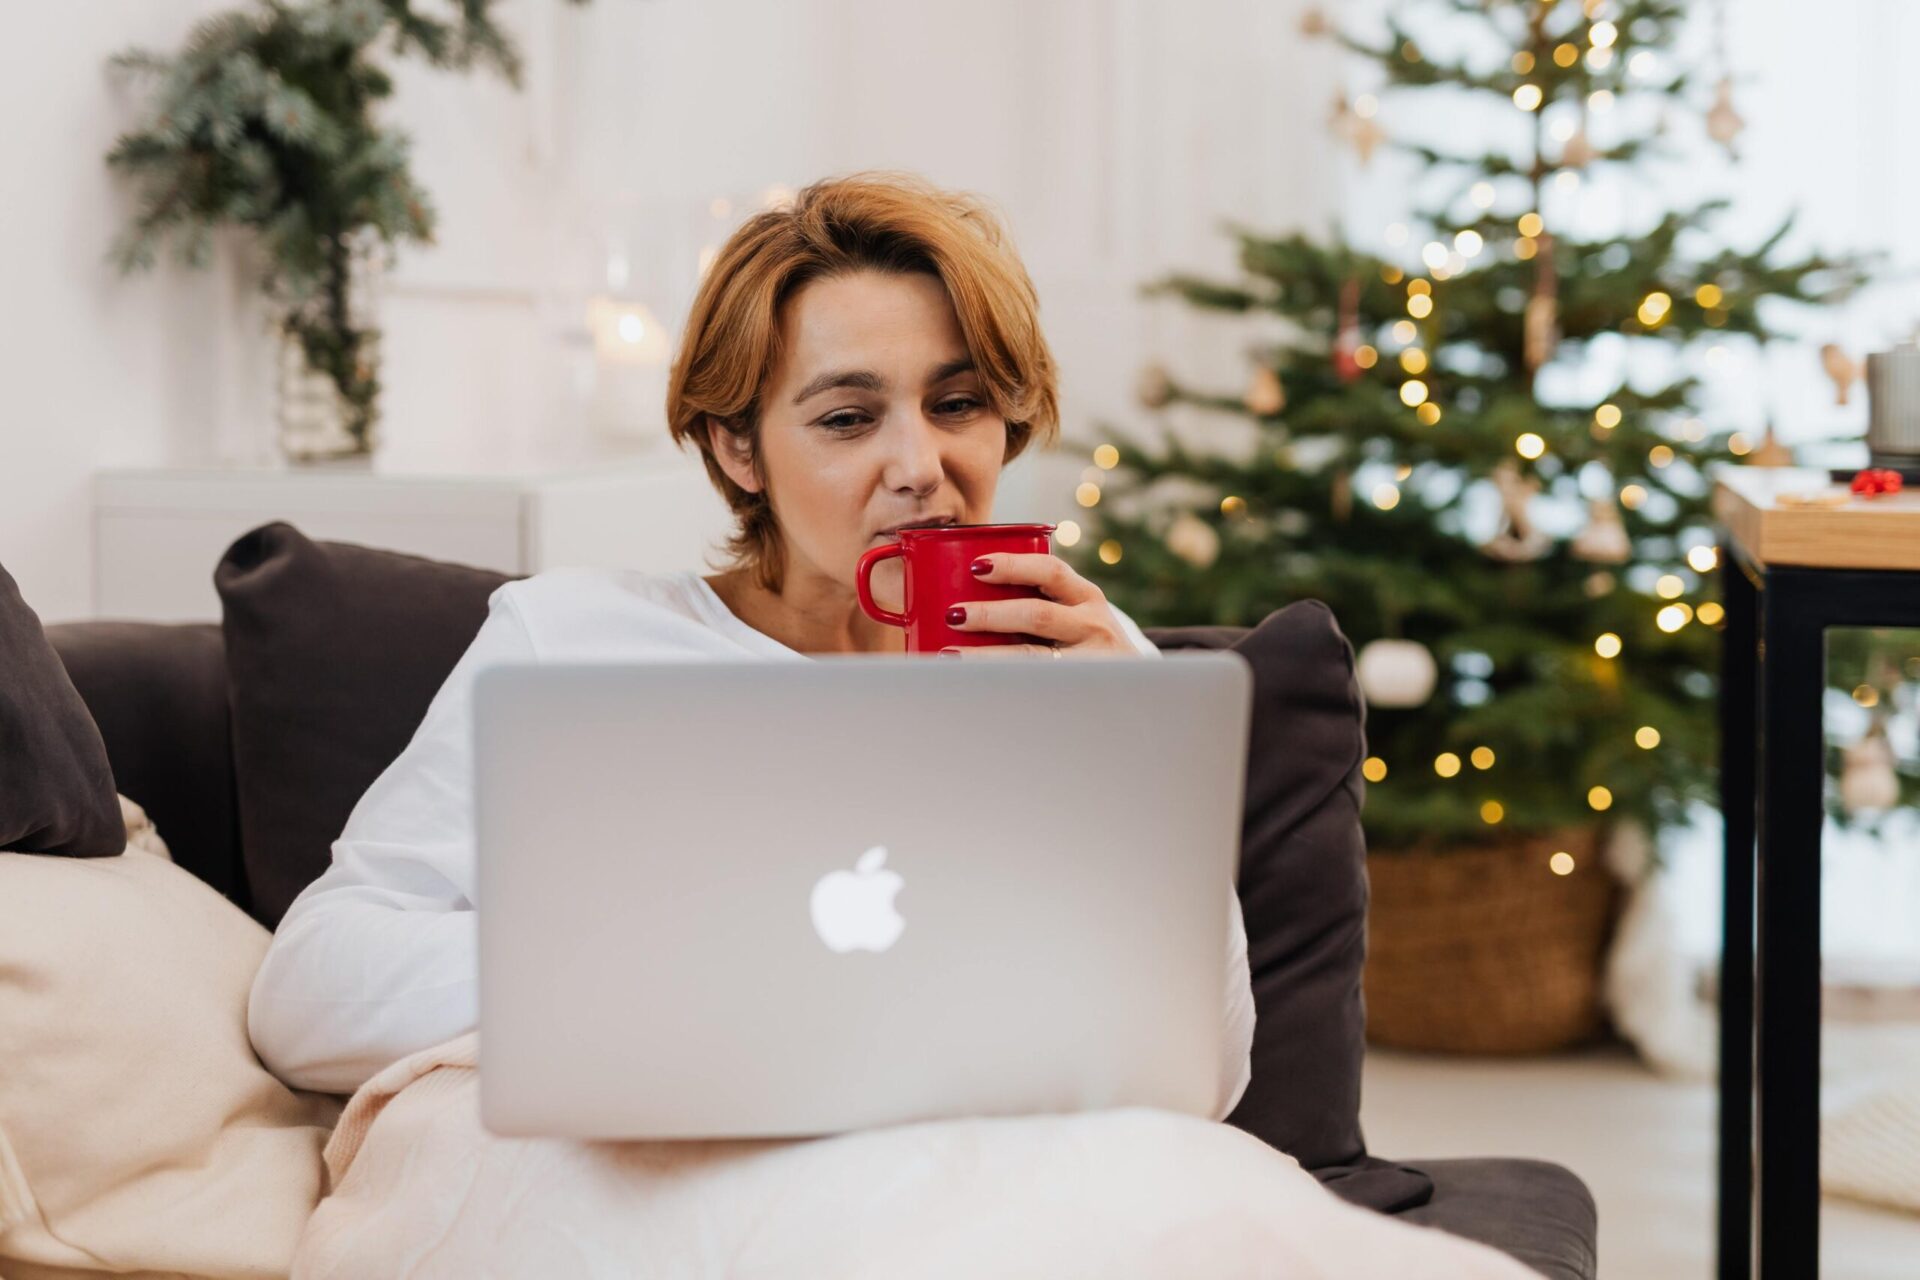 5 Tips to Stay Focused at Work Through the Holidays